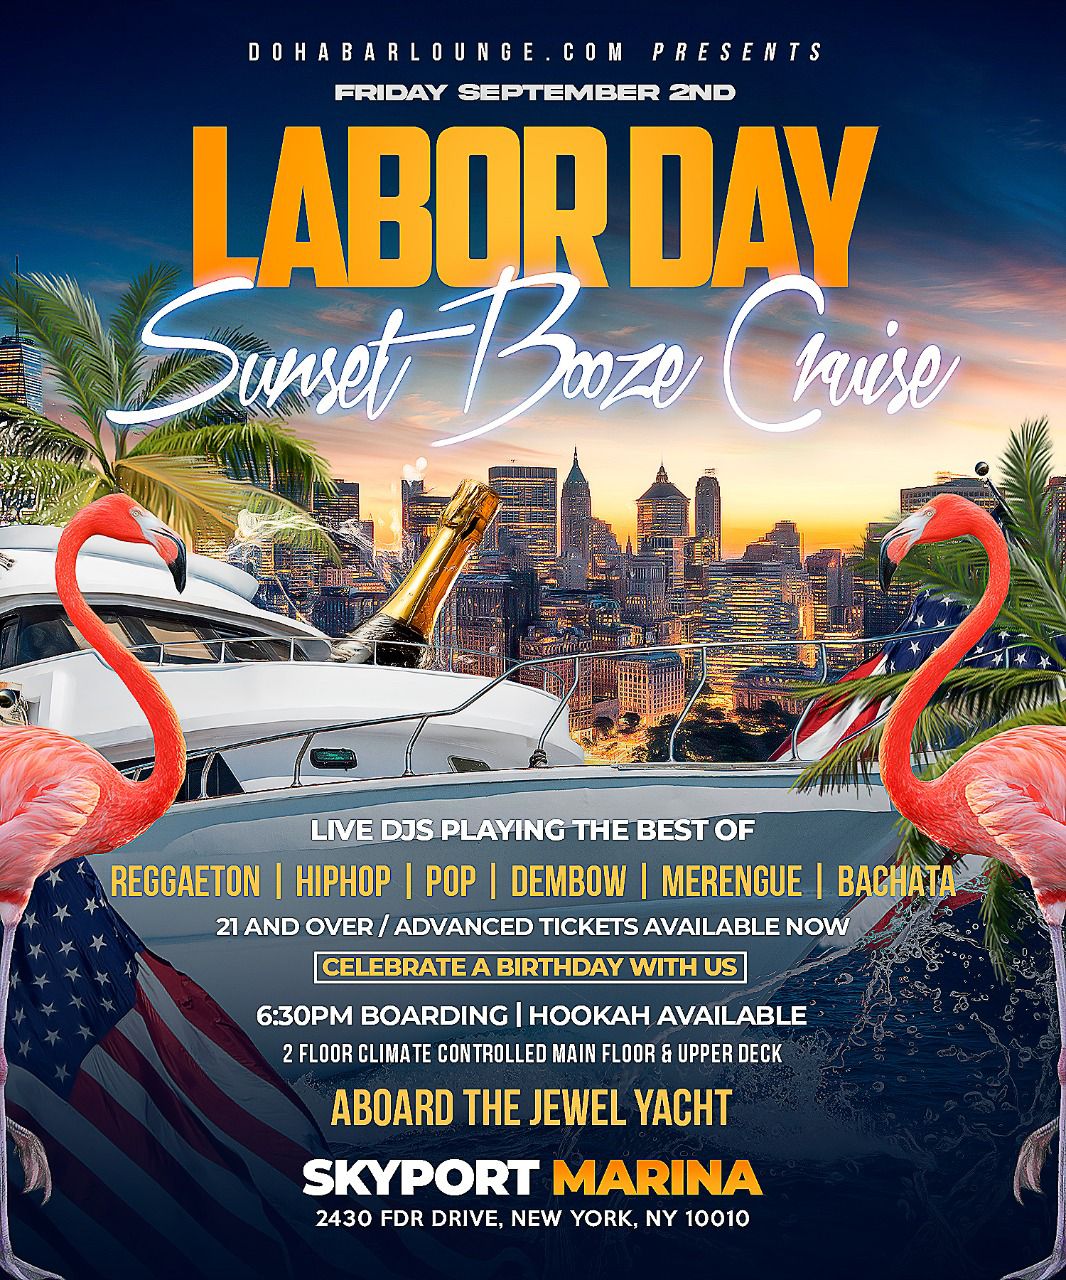 LABOR DAY WEEKEND YACHT CRUISE